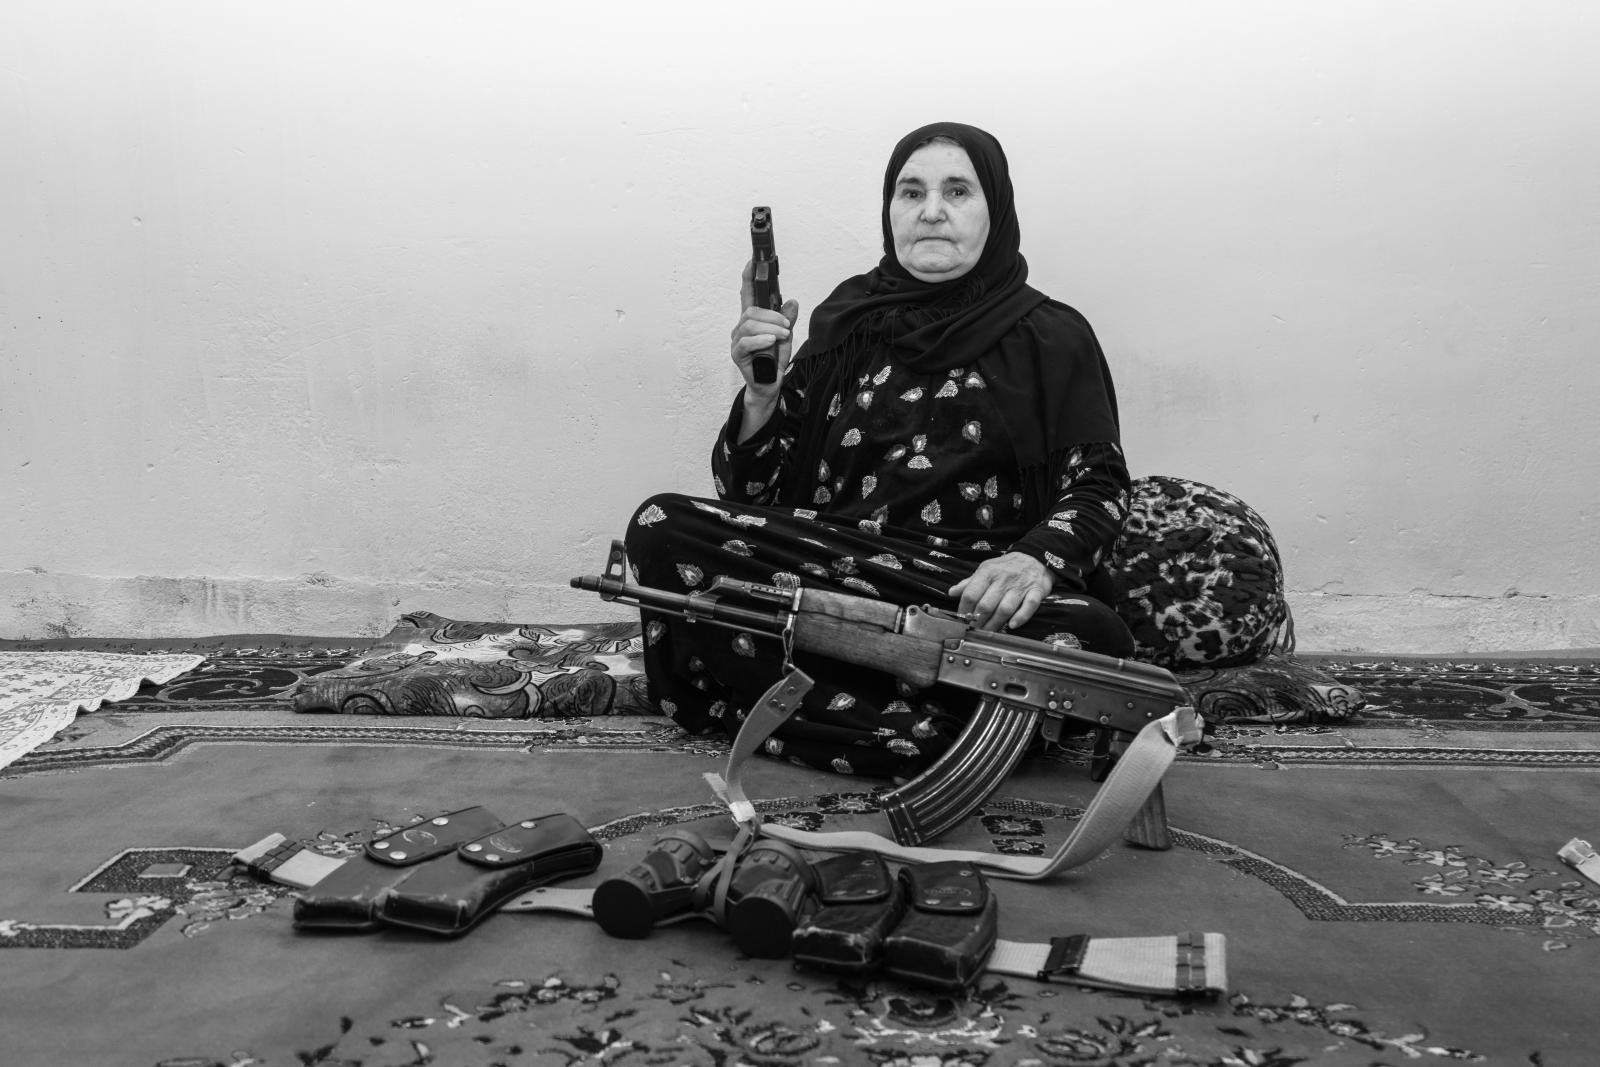 A Symbol of Kurdish women's courage and resistance | Buy this image